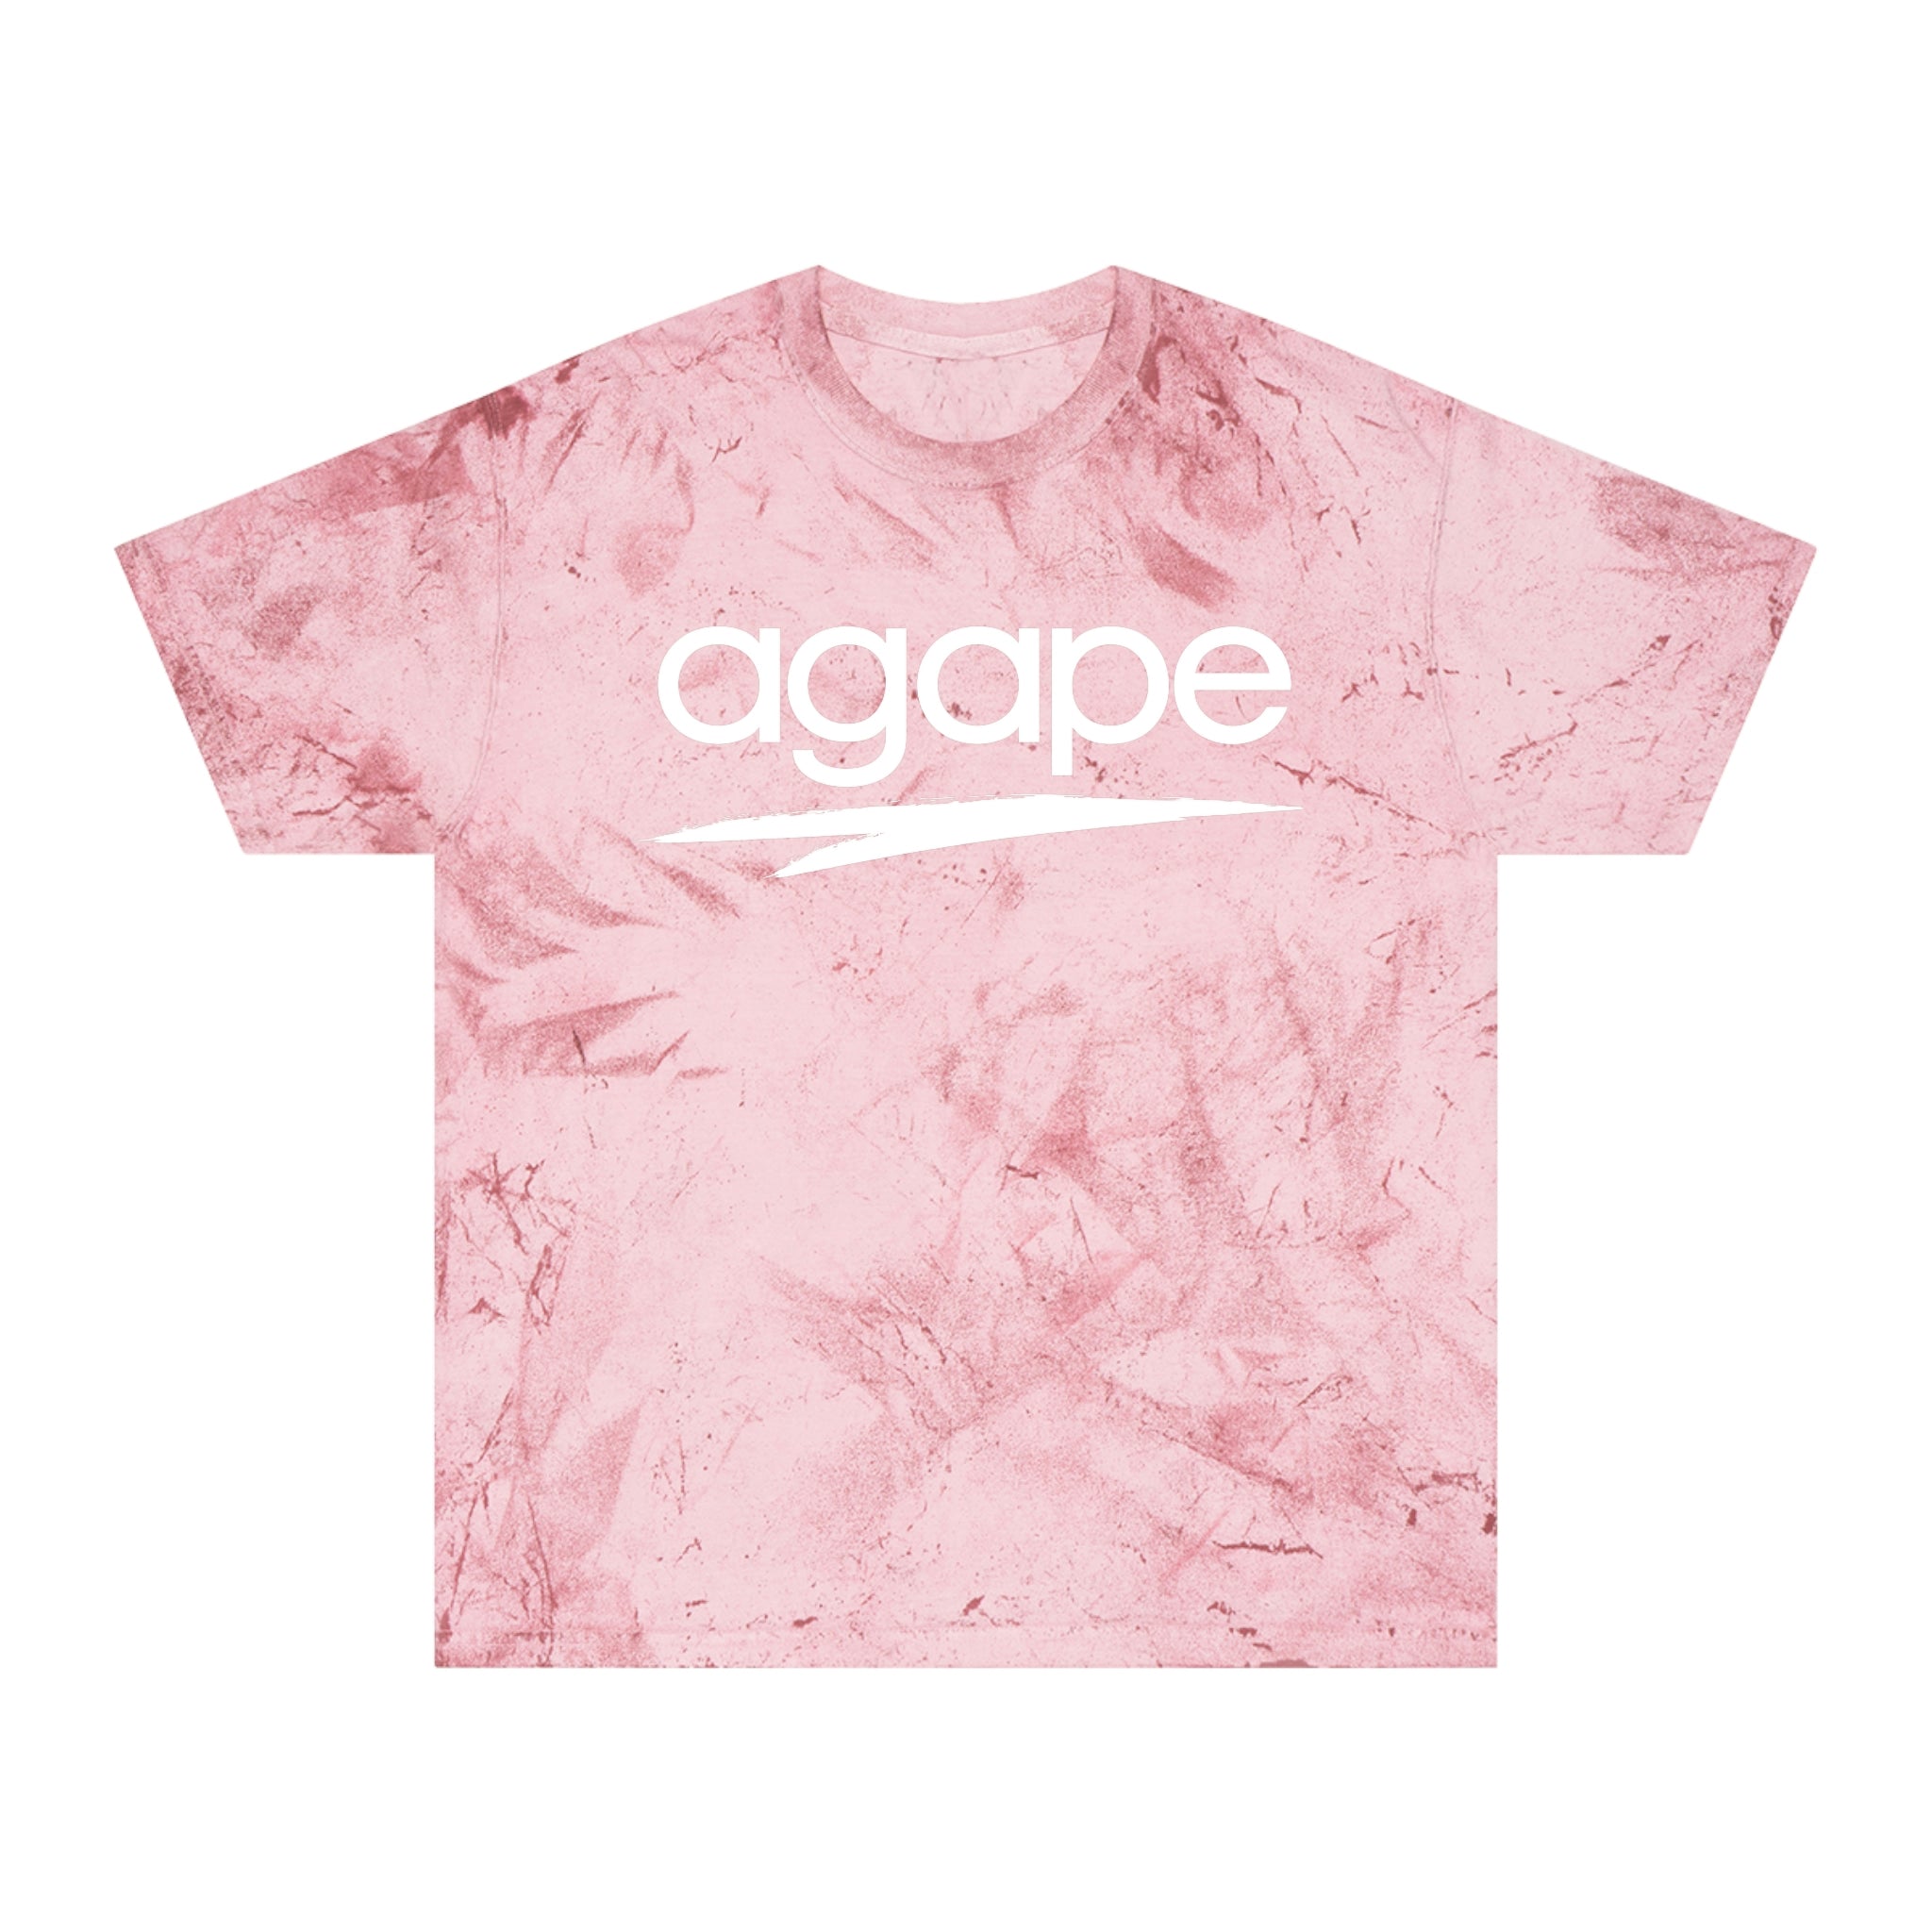 Agape Soft Tye-Dye Tee (in different colors)